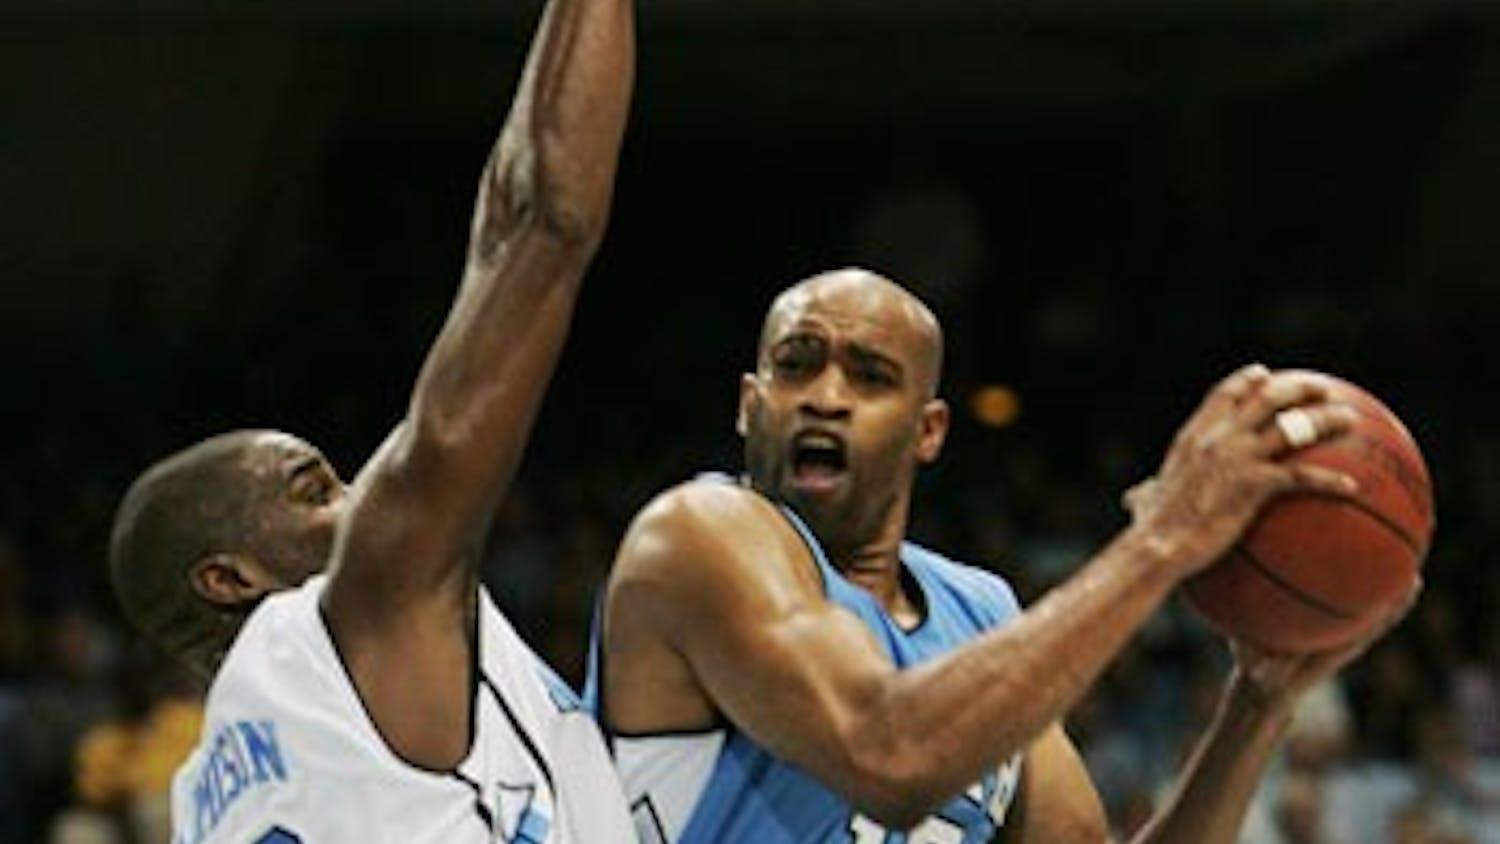 Vince Carter (right) and Antawn Jamison were teammates while at UNC from 1995 to 1998.